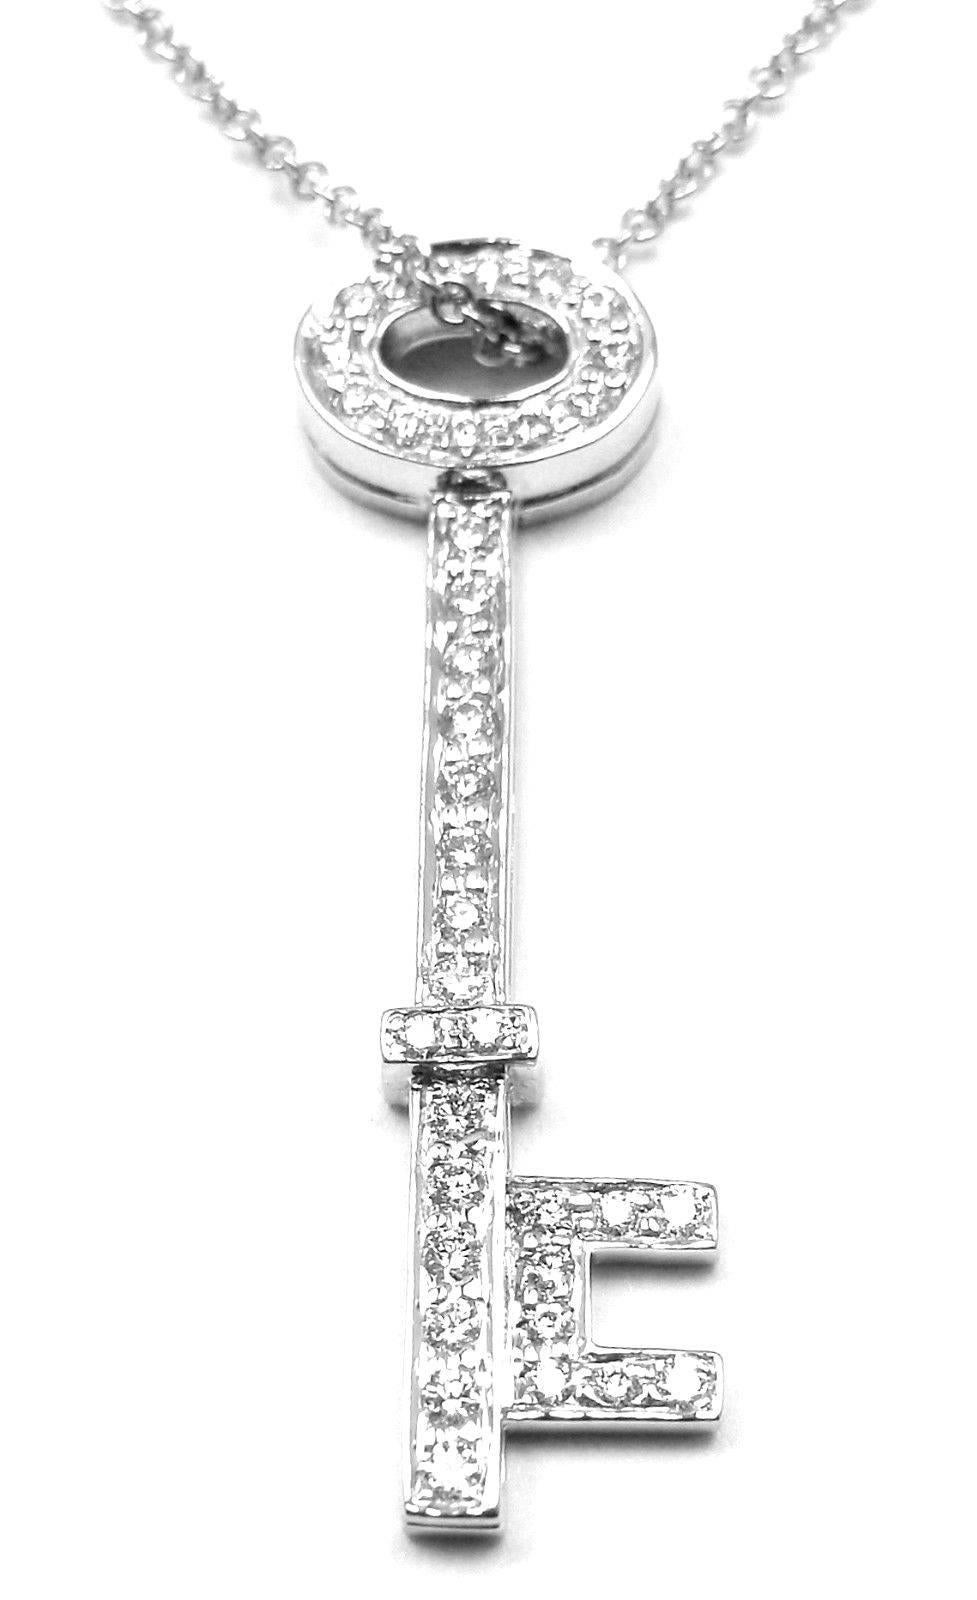 Platinum Oval Key Pendant Necklace by Tiffany & Co.
With 36 round brilliant cut diamonds VS1 clarity, G color total weight approx. .34ct

Details:
Measurements: Pendant: 1 1/4